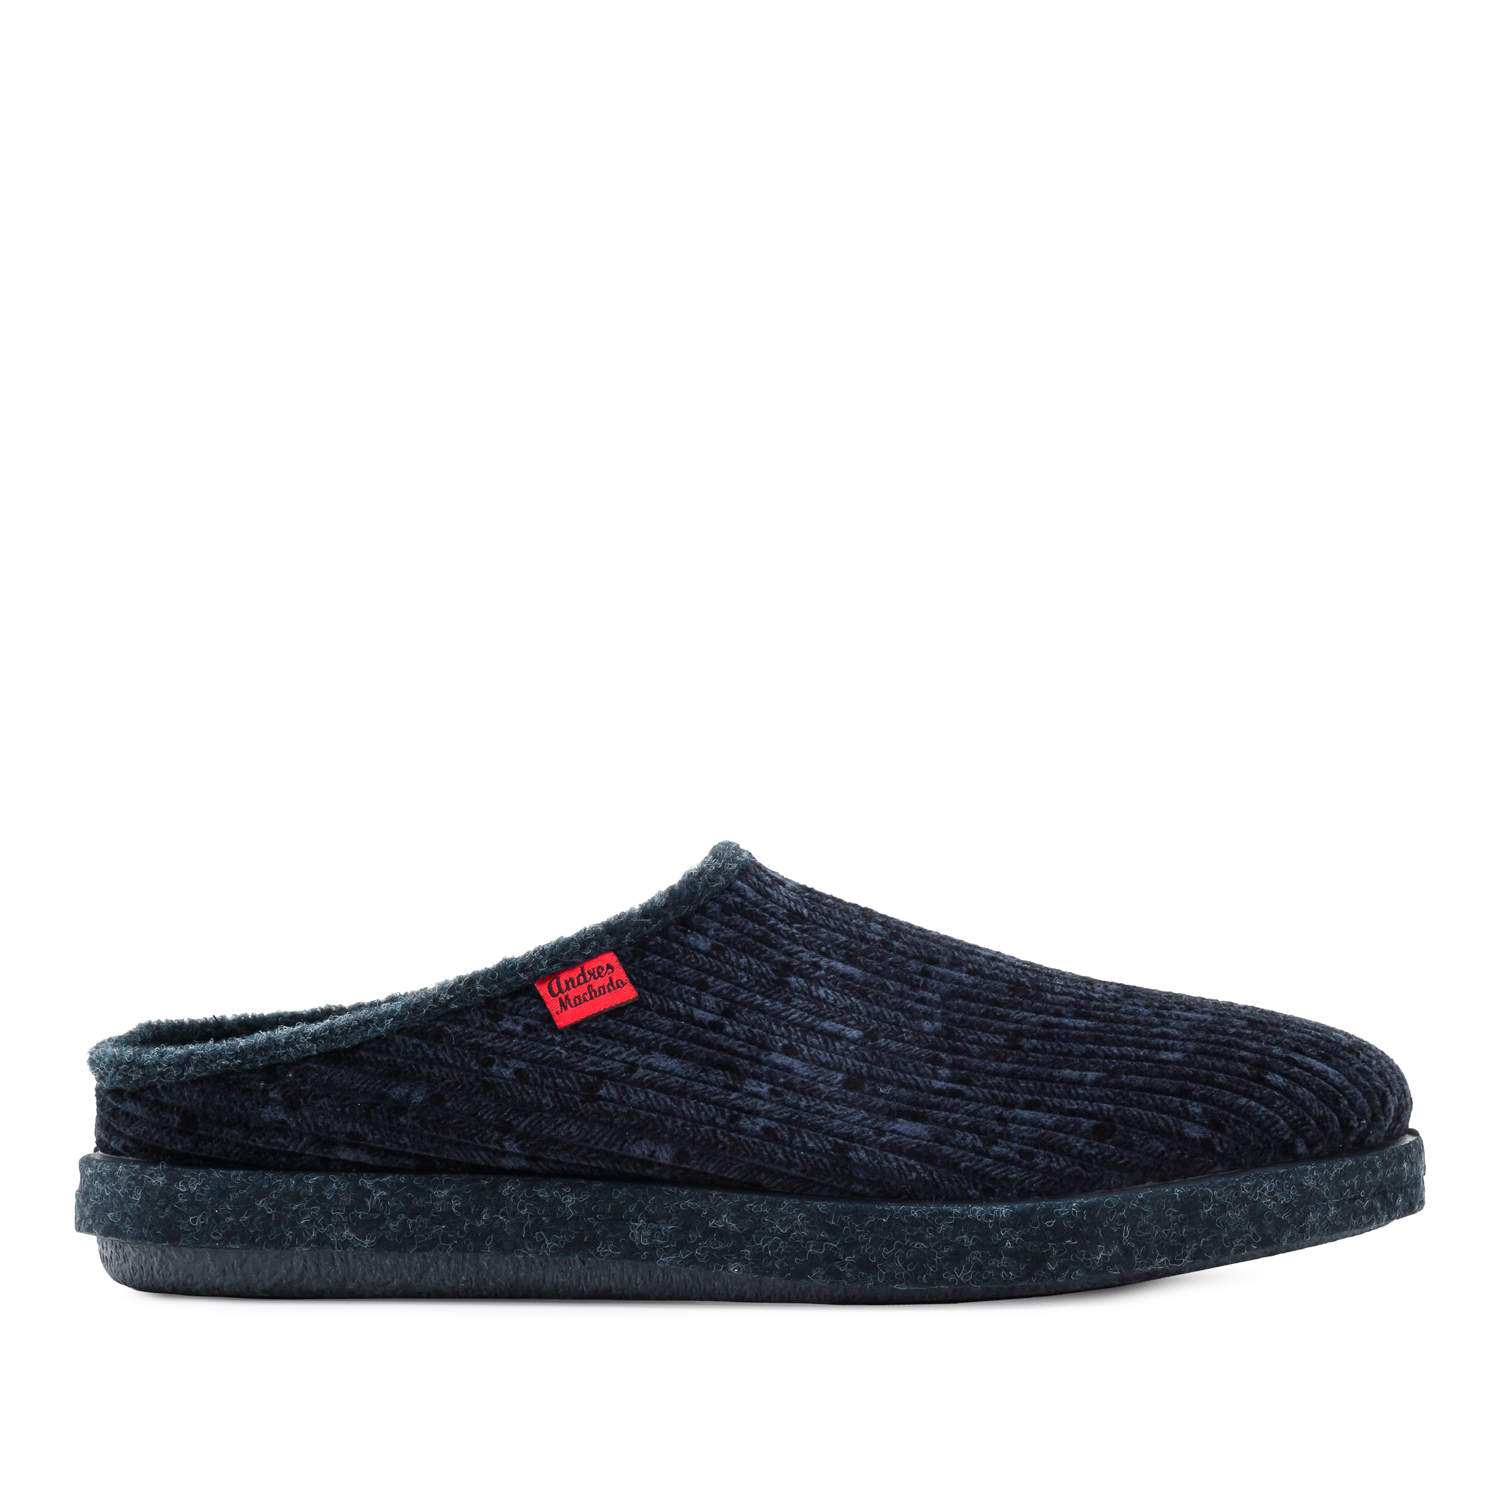 Very comfortable Blue Corduroy Slippers with footbed 